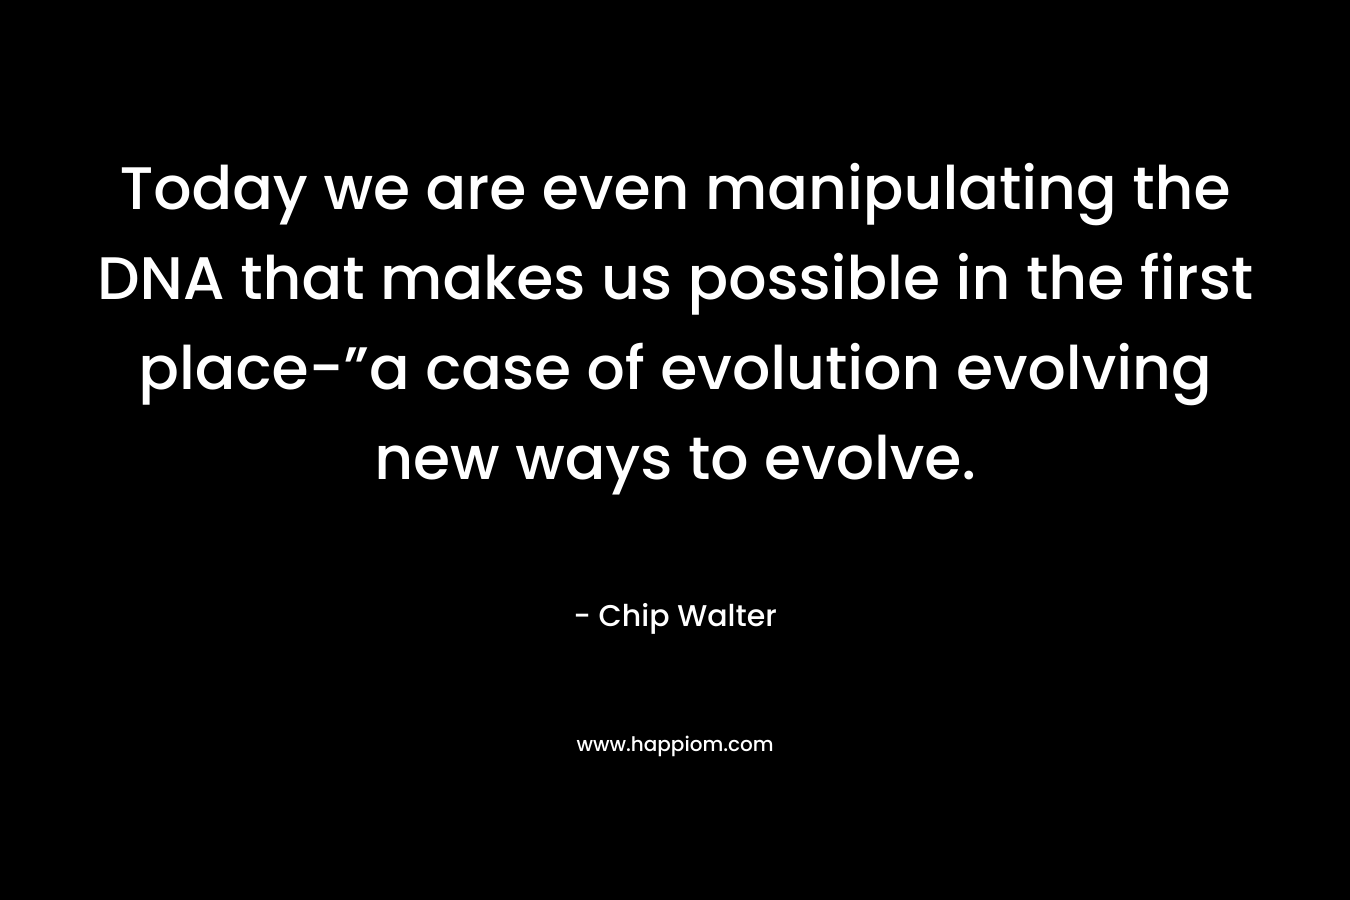 Today we are even manipulating the DNA that makes us possible in the first place-”a case of evolution evolving new ways to evolve. – Chip Walter